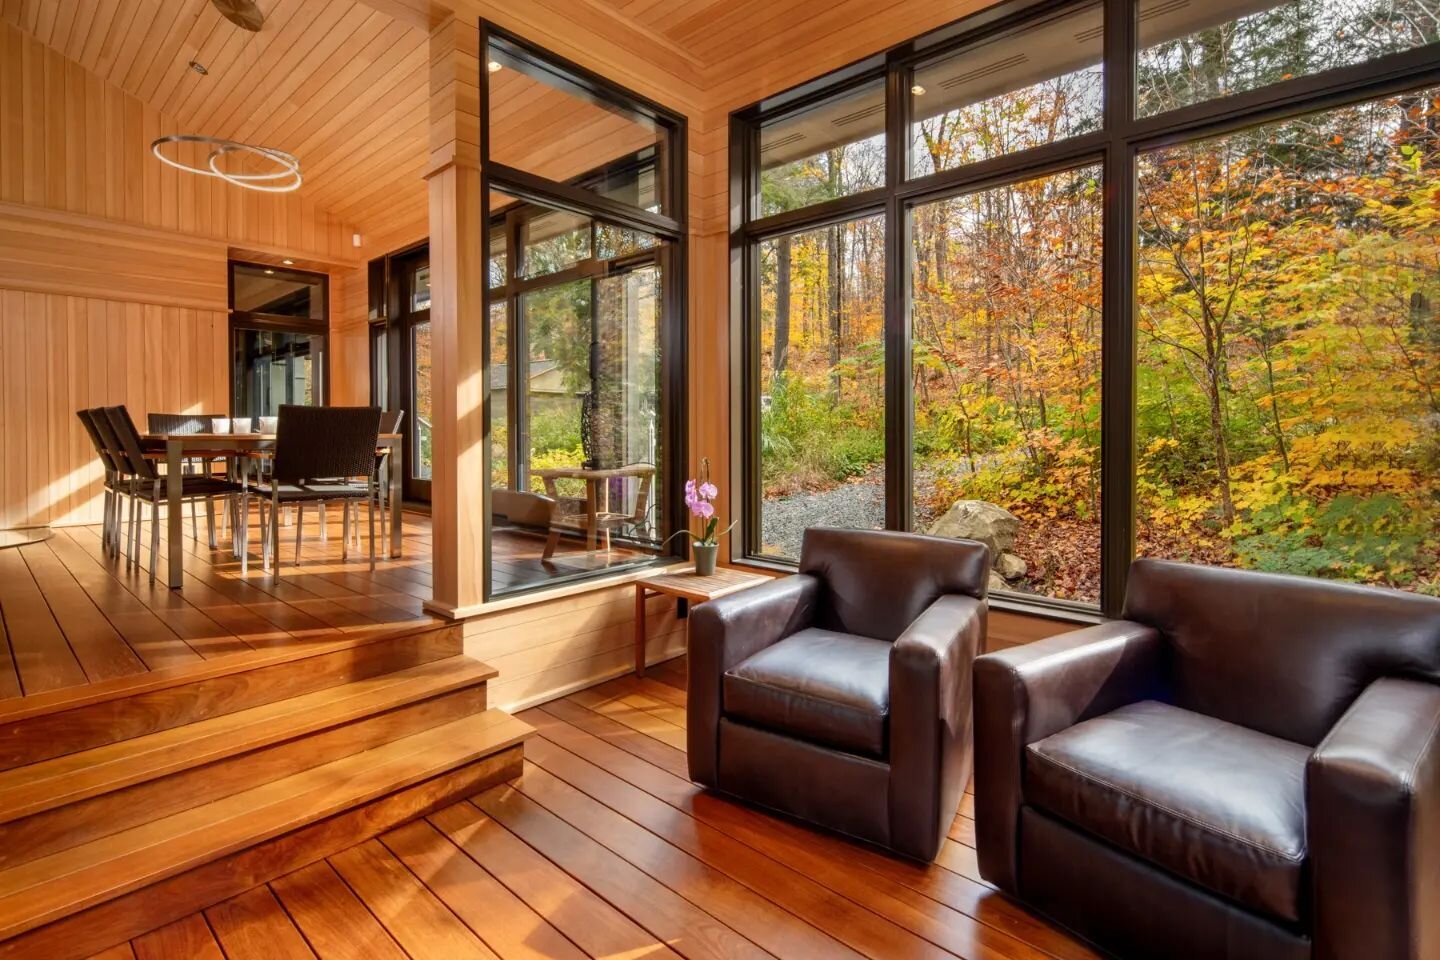 Warm and welcoming interior with an incredible view of the autumn woods. 
.
@tamaracknorthltd.
.
.#architecturalphotographer #architecturalphotography #comercialphotography #marketing #photographer #interiordesign #custombuilder #cottage #luxuryhomes